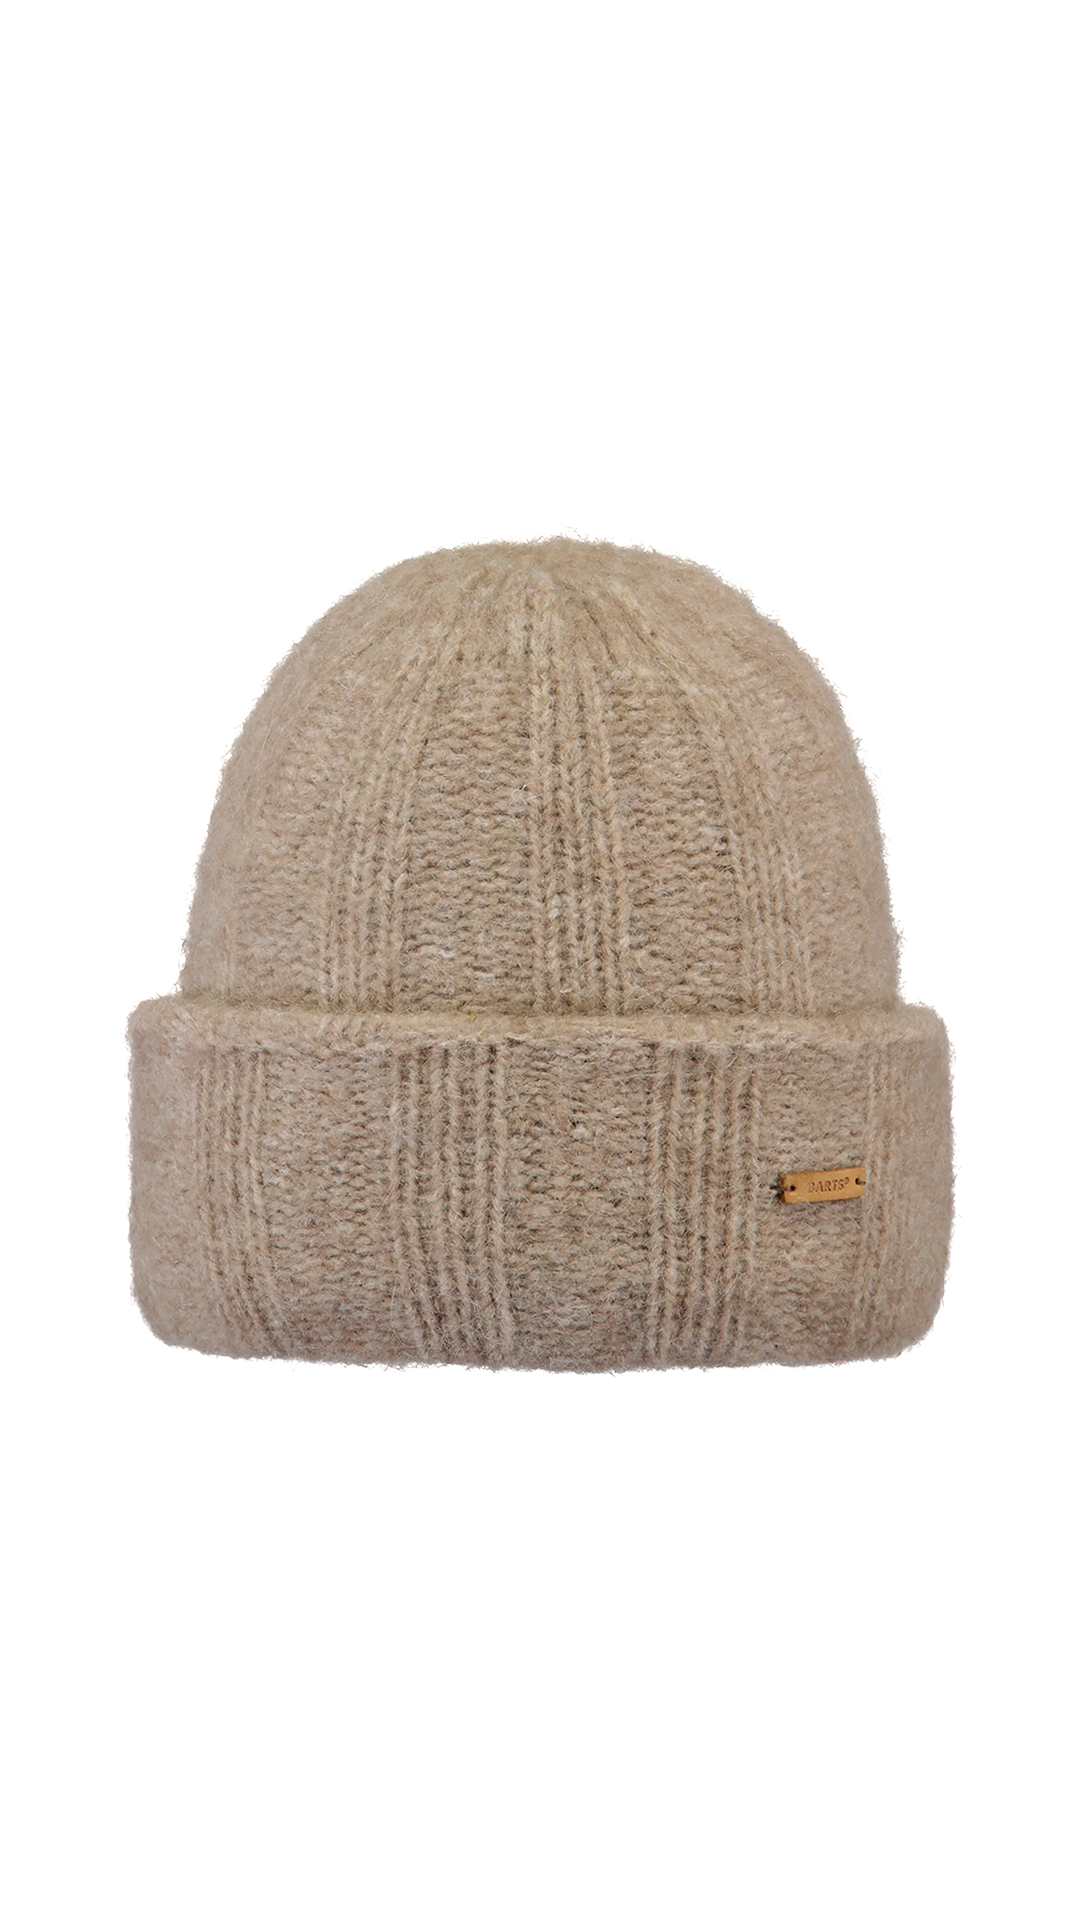 BARTS River Rush Beanie BARTS - Order light now brown at